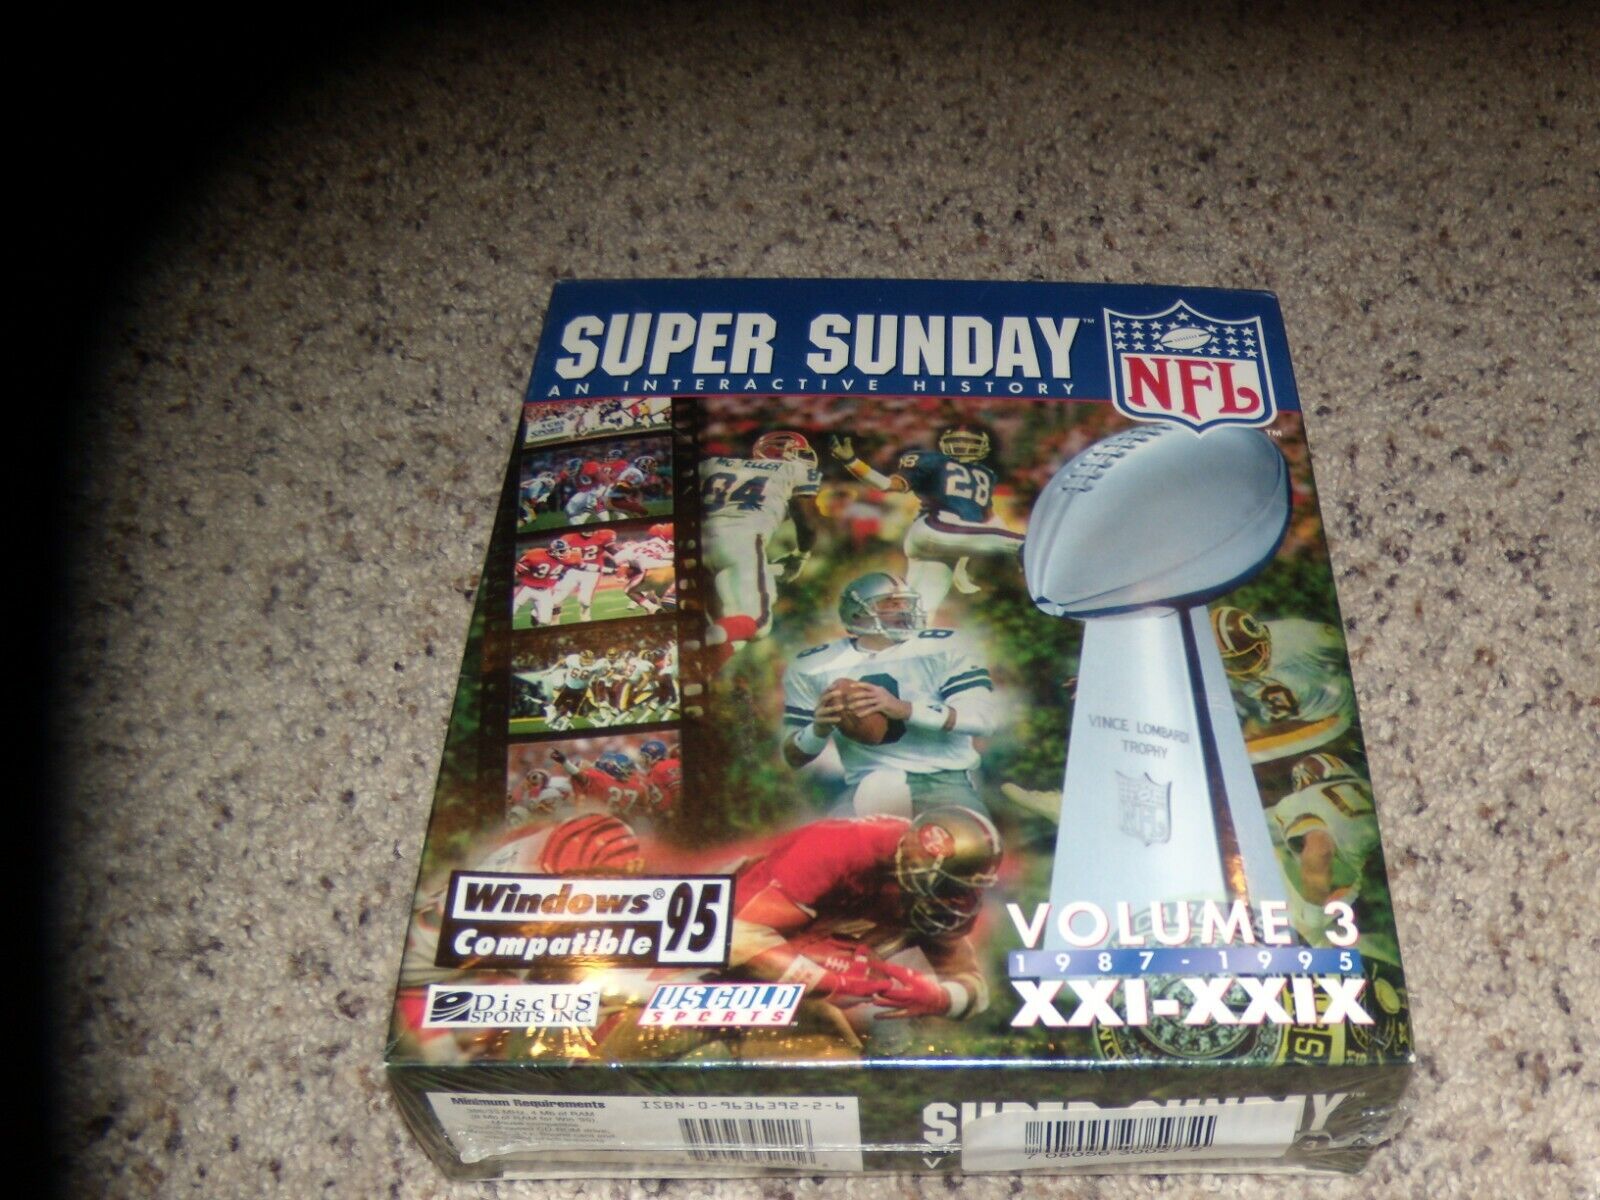 Super Sunday An Interactive History Volume 3 1987-1995 (PC, 1995) New & Sealed